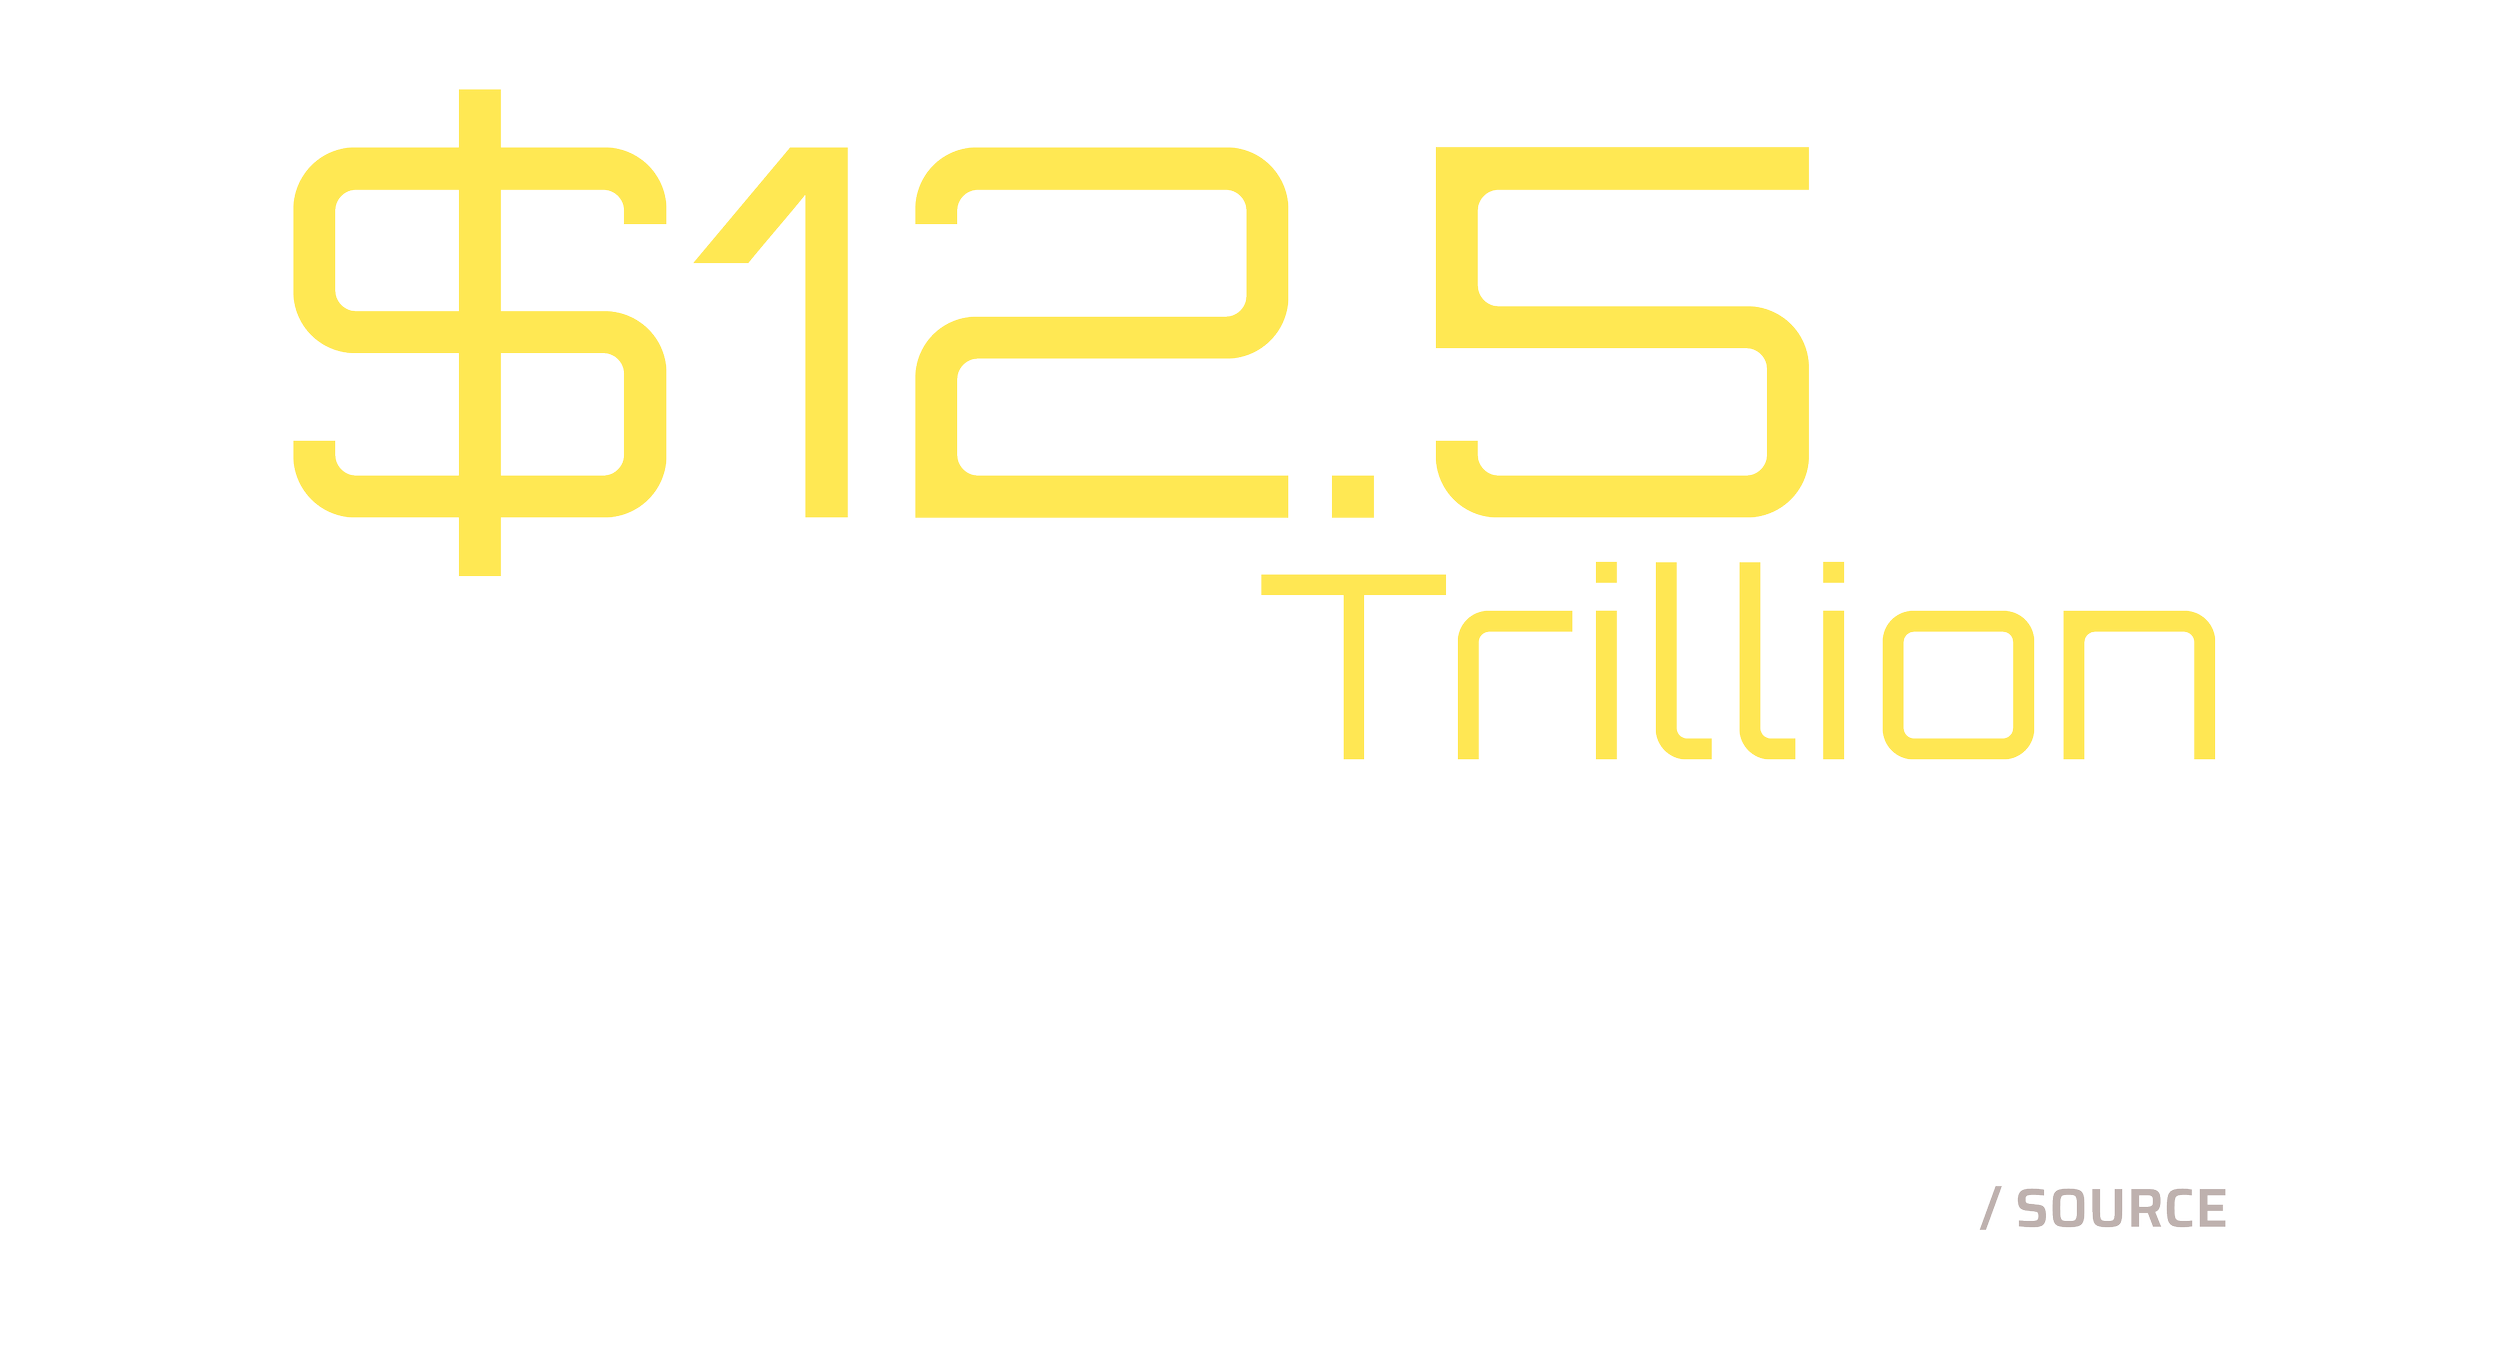  Text reading: Estimated global economic burden of COVID-19:  $12.5 trillion.  Click for data source link. 